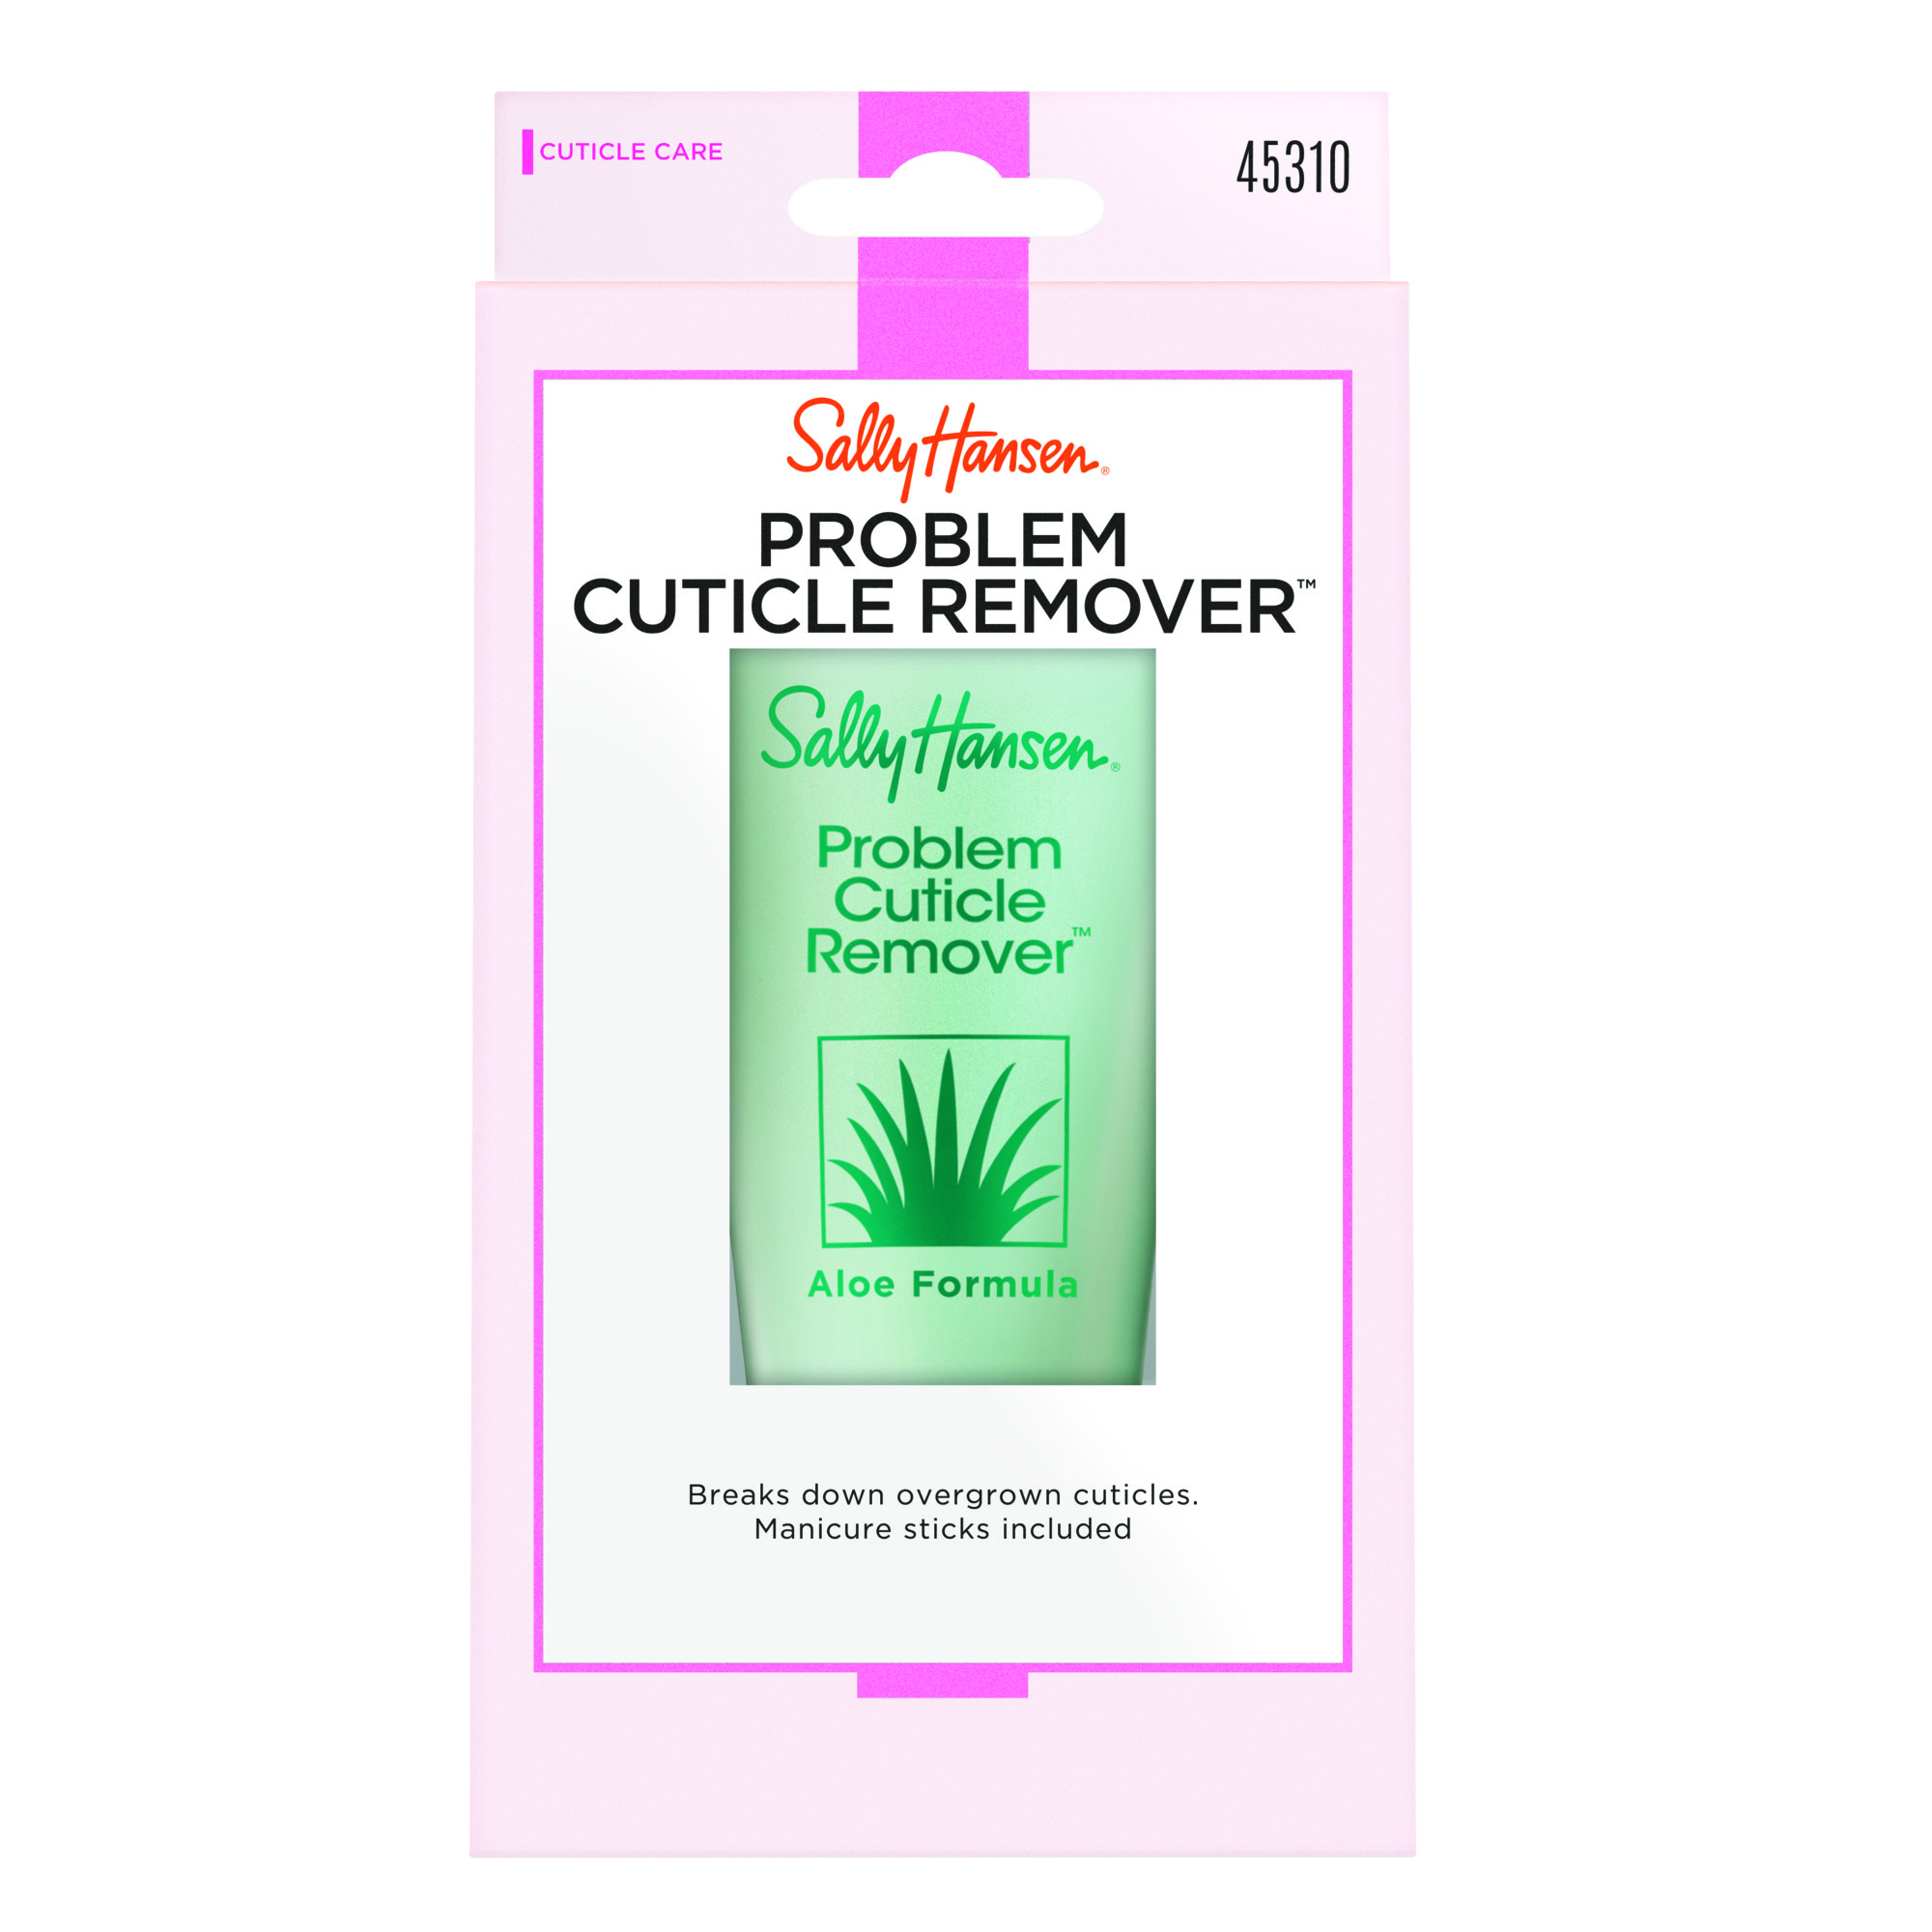 Sally Hansen Problem Cuticle Remover™, Eliminate Thick & Overgrown Cuticles, 1 Oz, Cuticle Remover Cream, Cuticle Remover Gel, Ph Balance Formula, Infused with Aloe Vera to Soothe and Condition - image 1 of 3